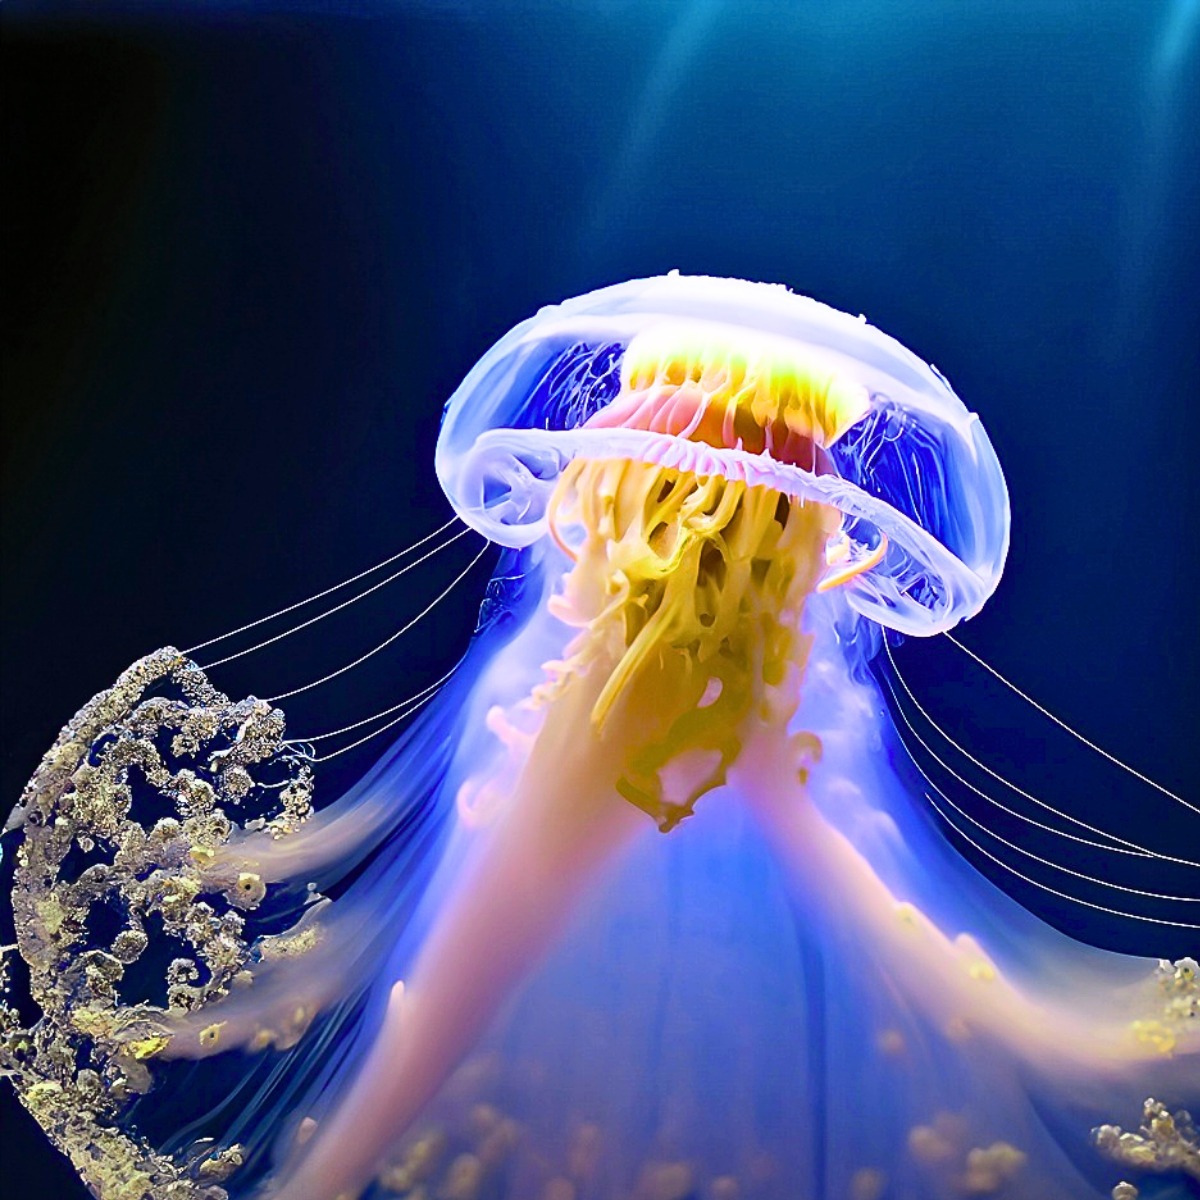 does jellyfish have eyes